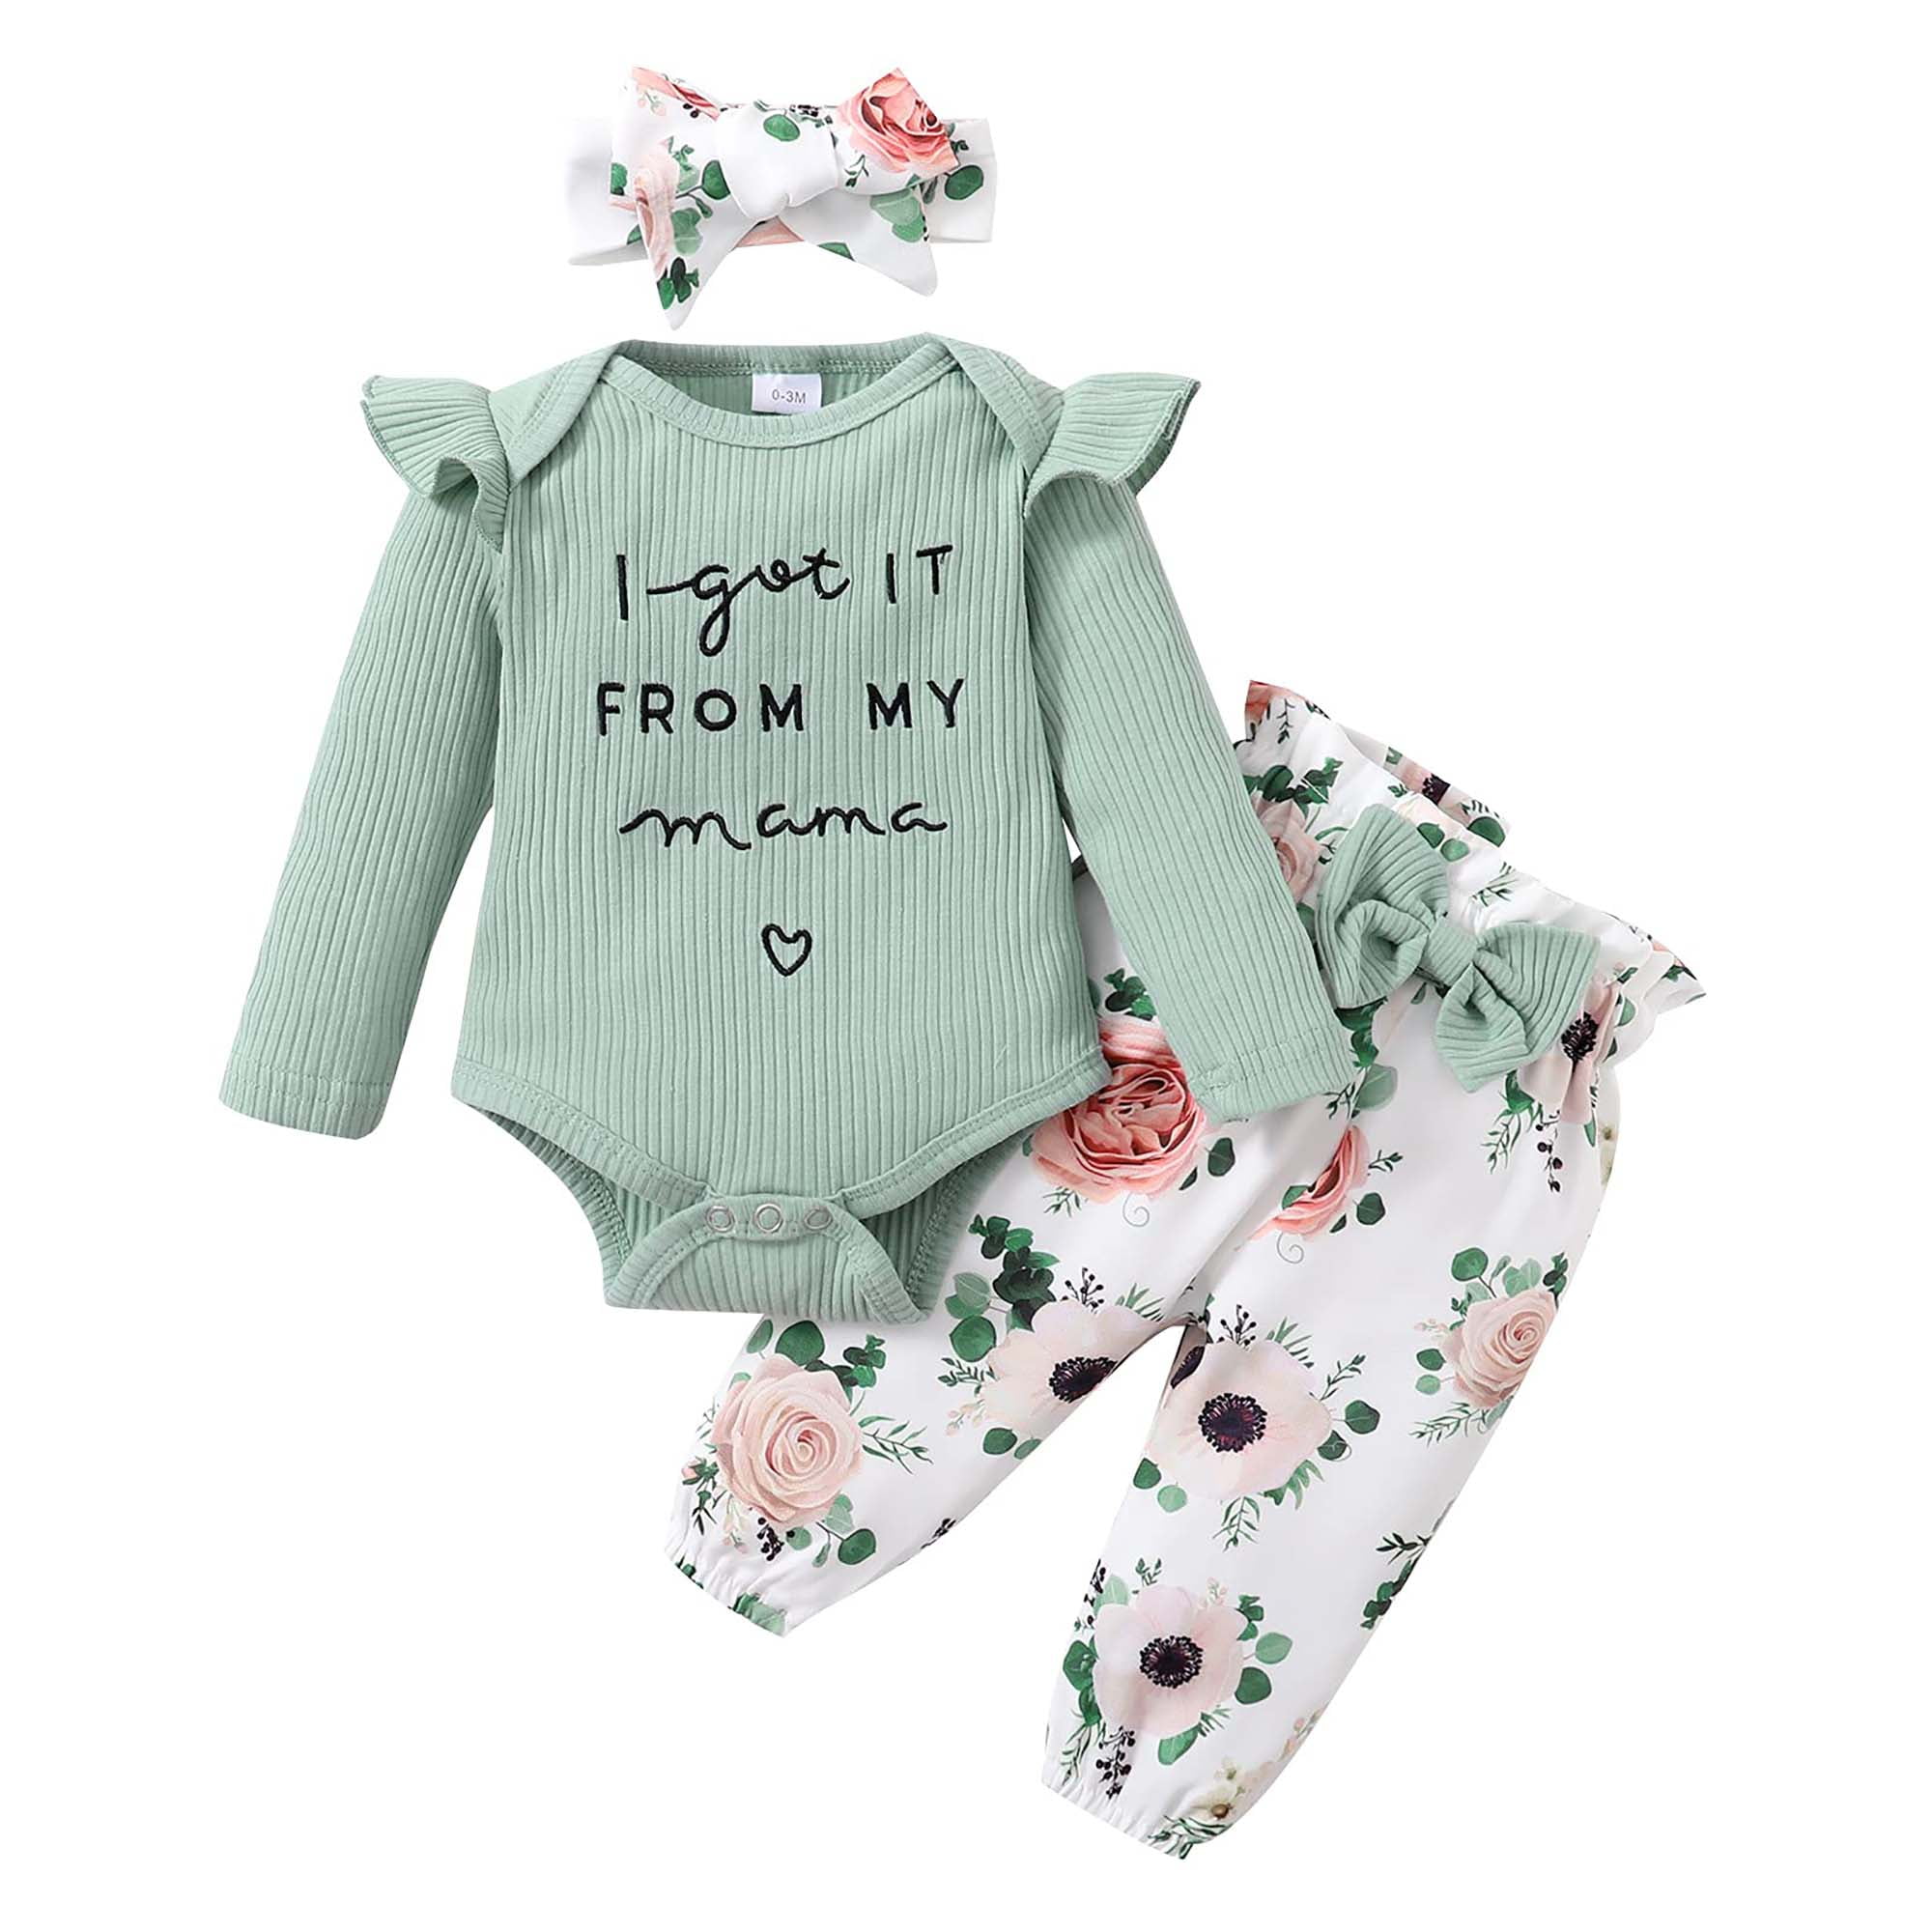 CARETOO Newborn Baby Girl Casual Clothes Outfit Ruffle Romper Shirt ...